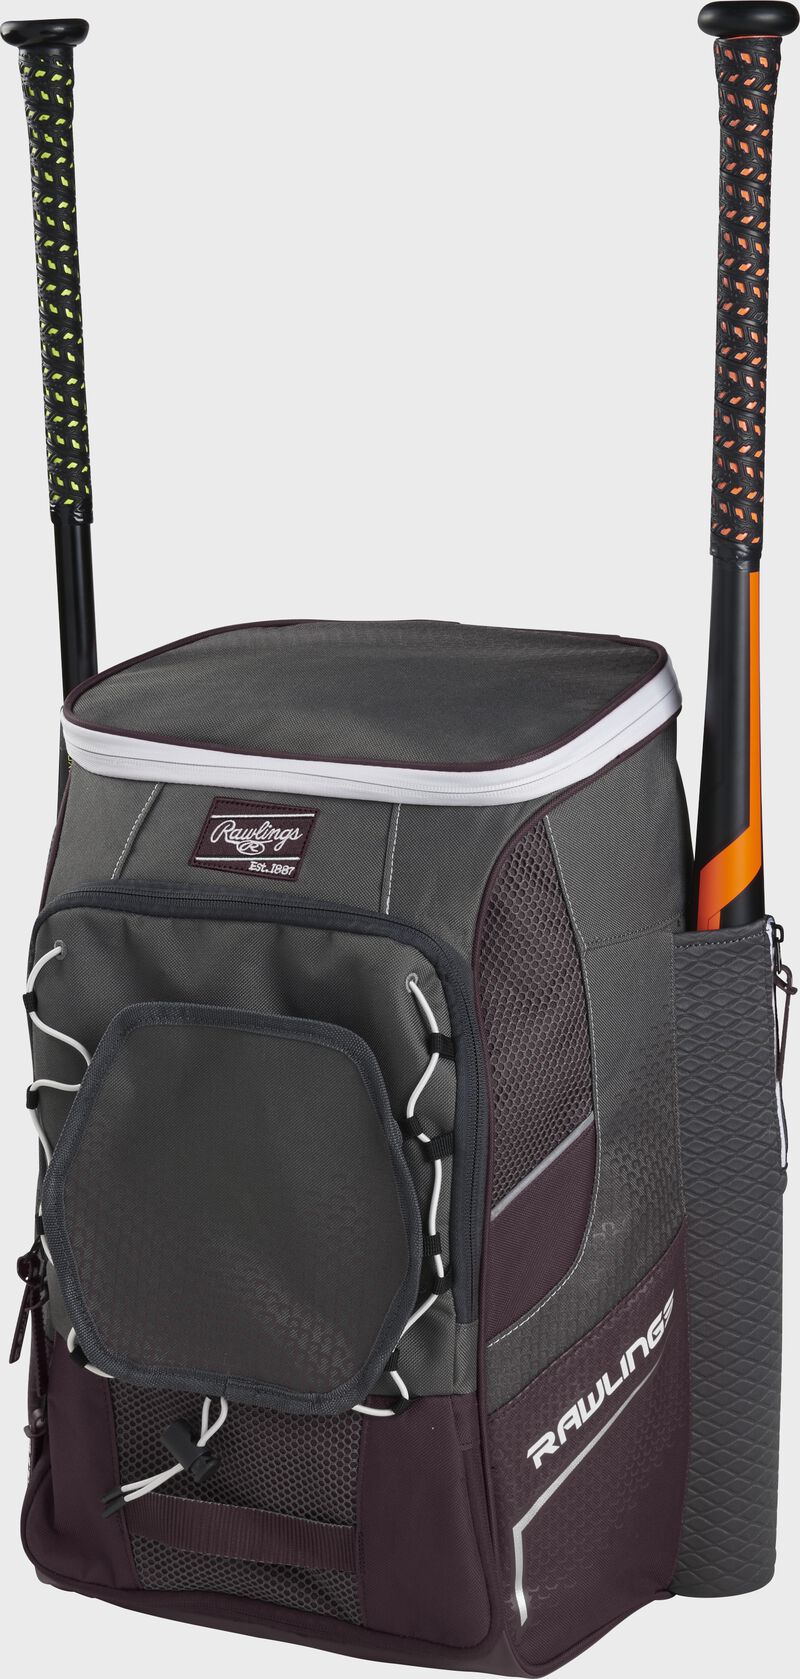 Front right angle view of a maroon Impulse backpack with two bats in the side sleeves - SKU: IMPLSE-MA